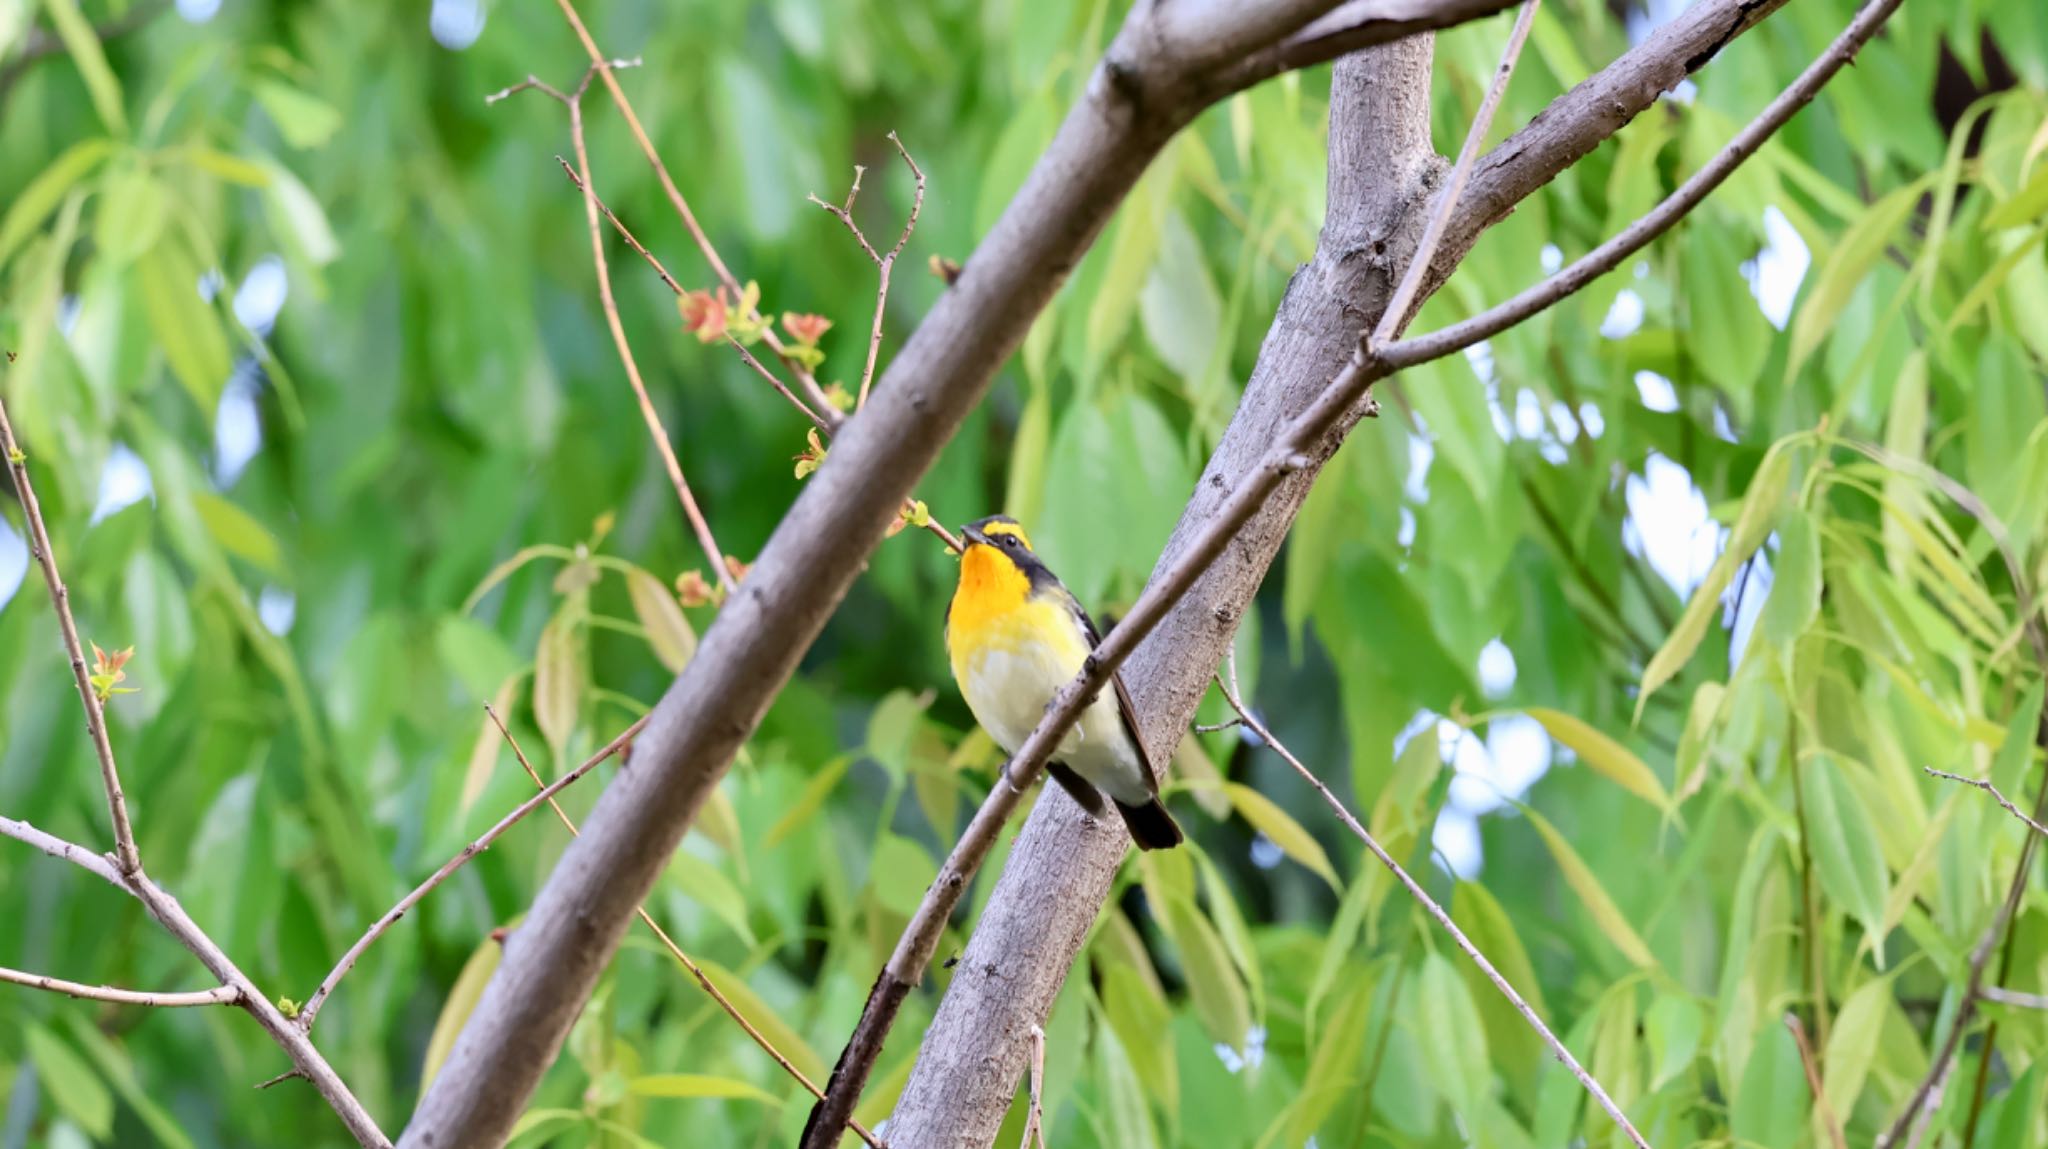 Photo of Narcissus Flycatcher at 尼崎市 by 洗濯バサミ